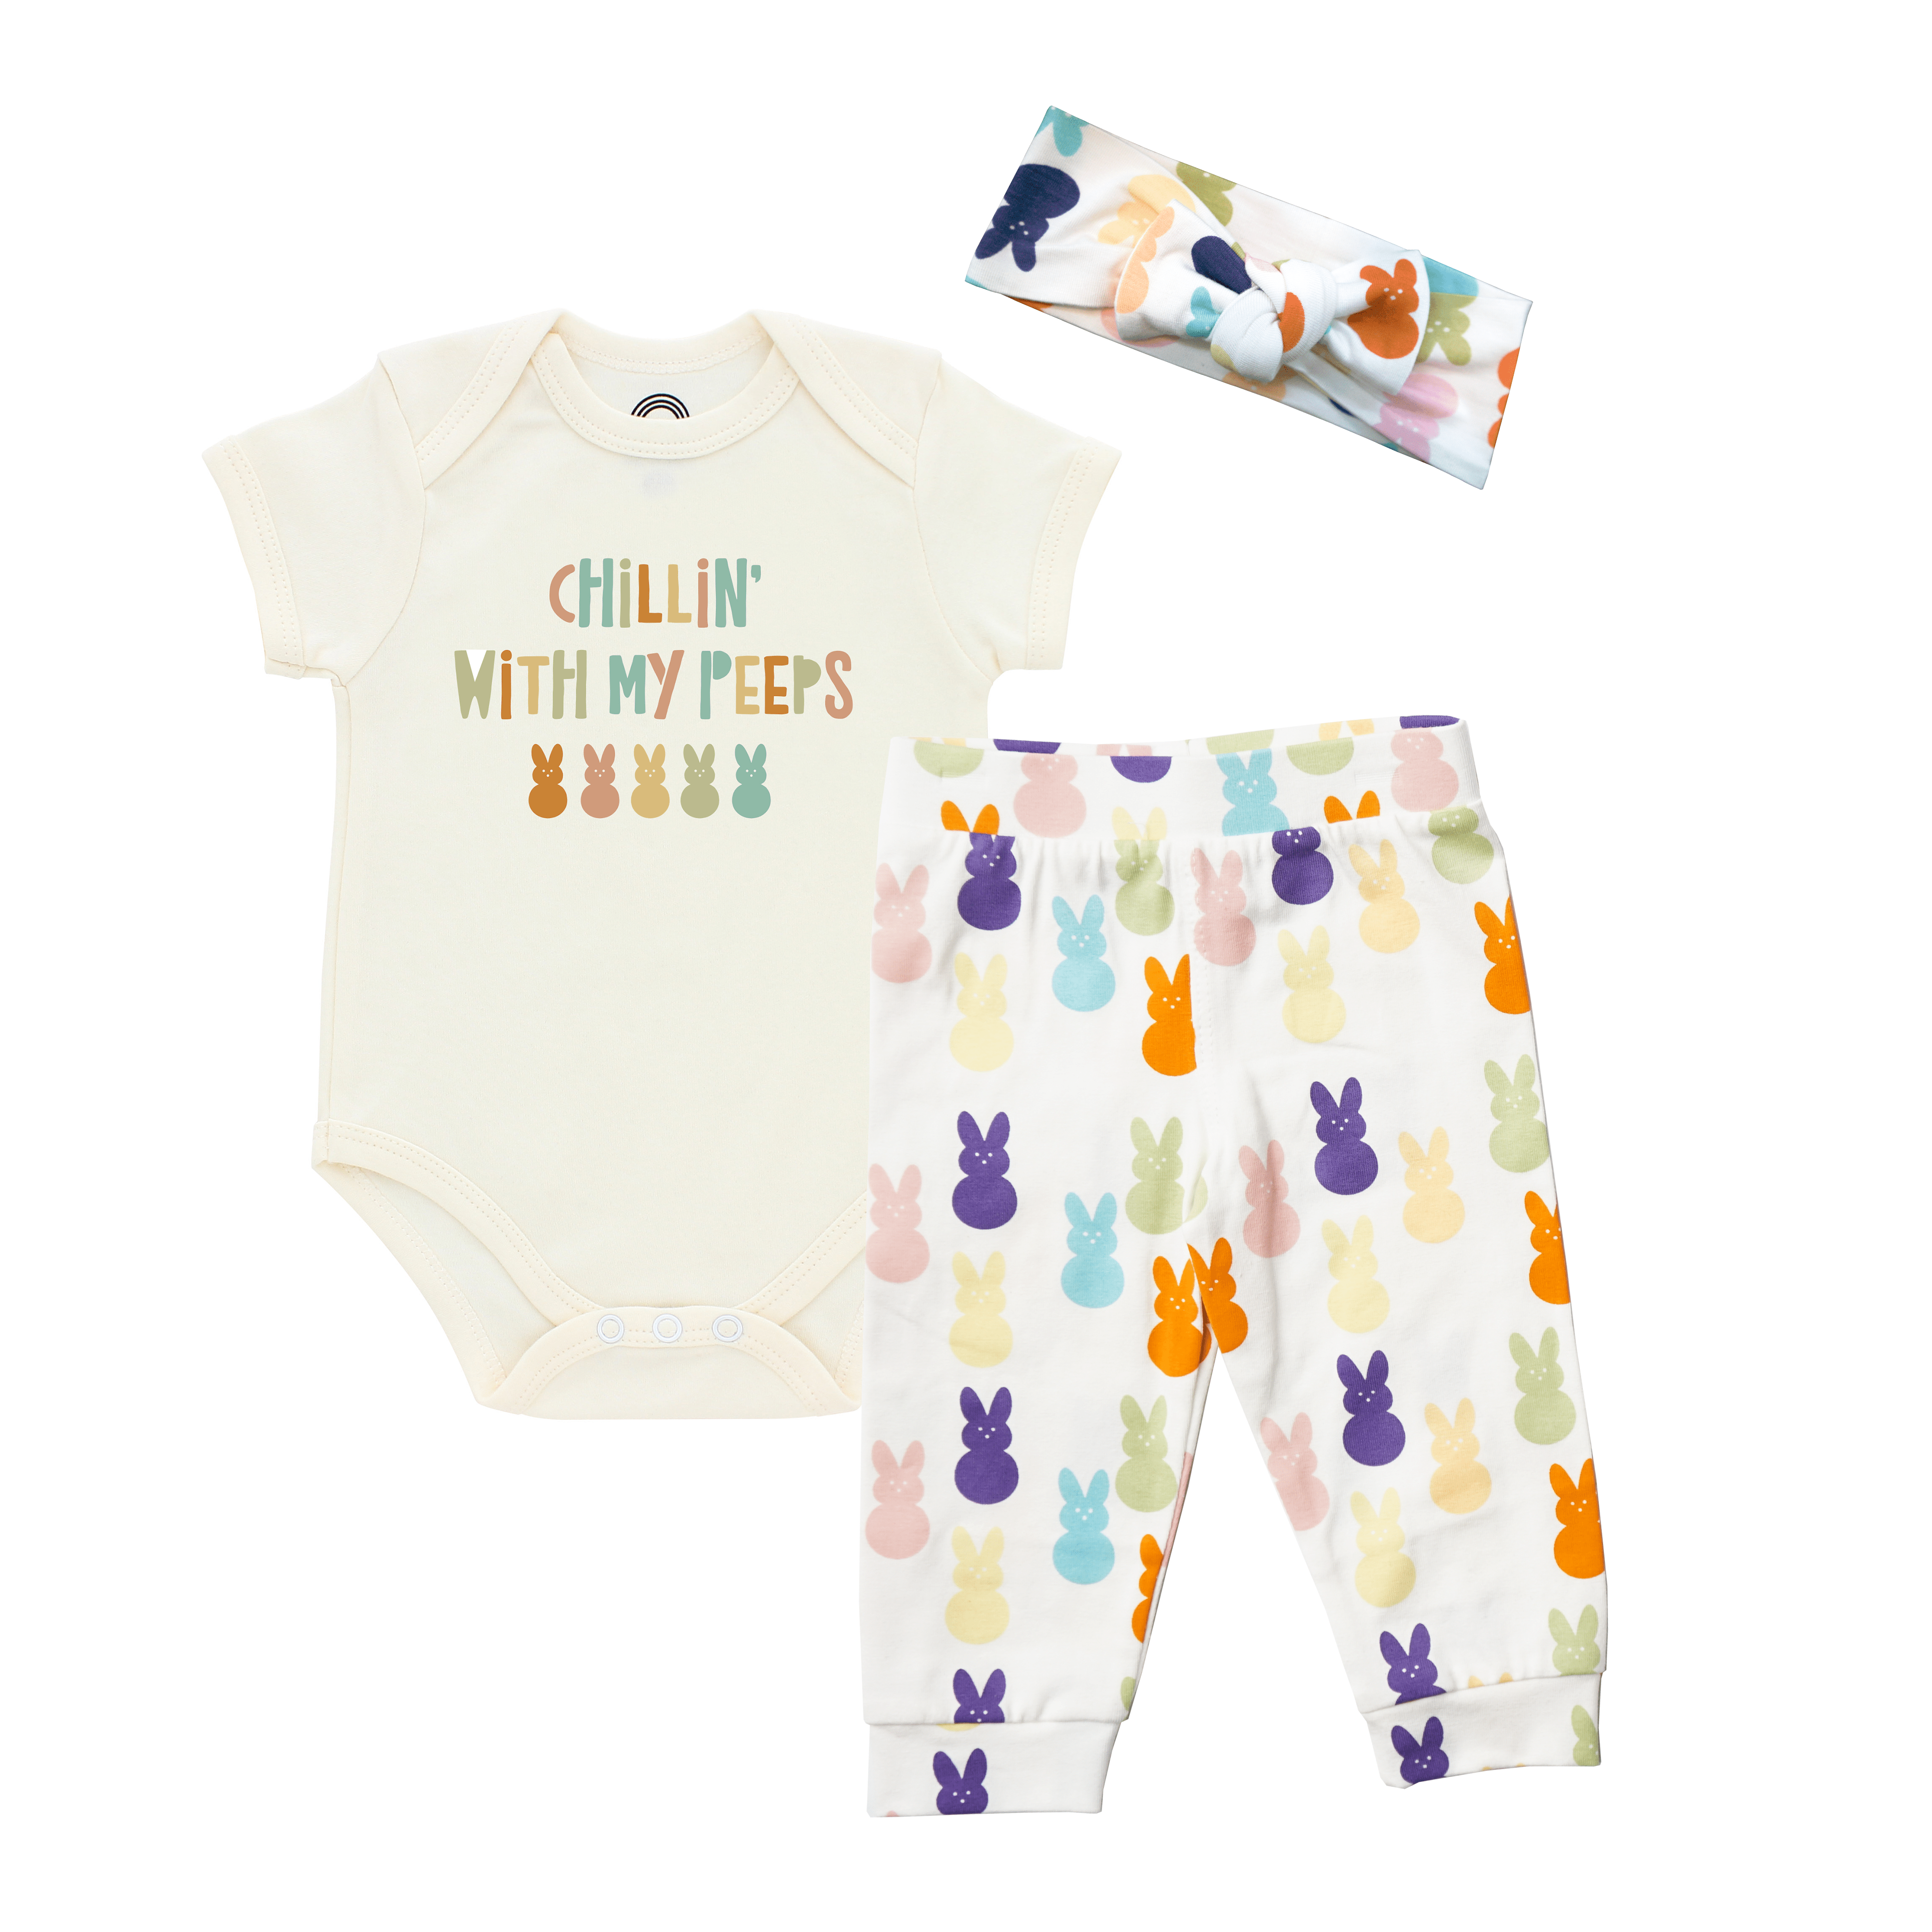 Chillin with My Peeps Easter Bunny Cotton Baby Onesie Set - Stella Lane Boutique